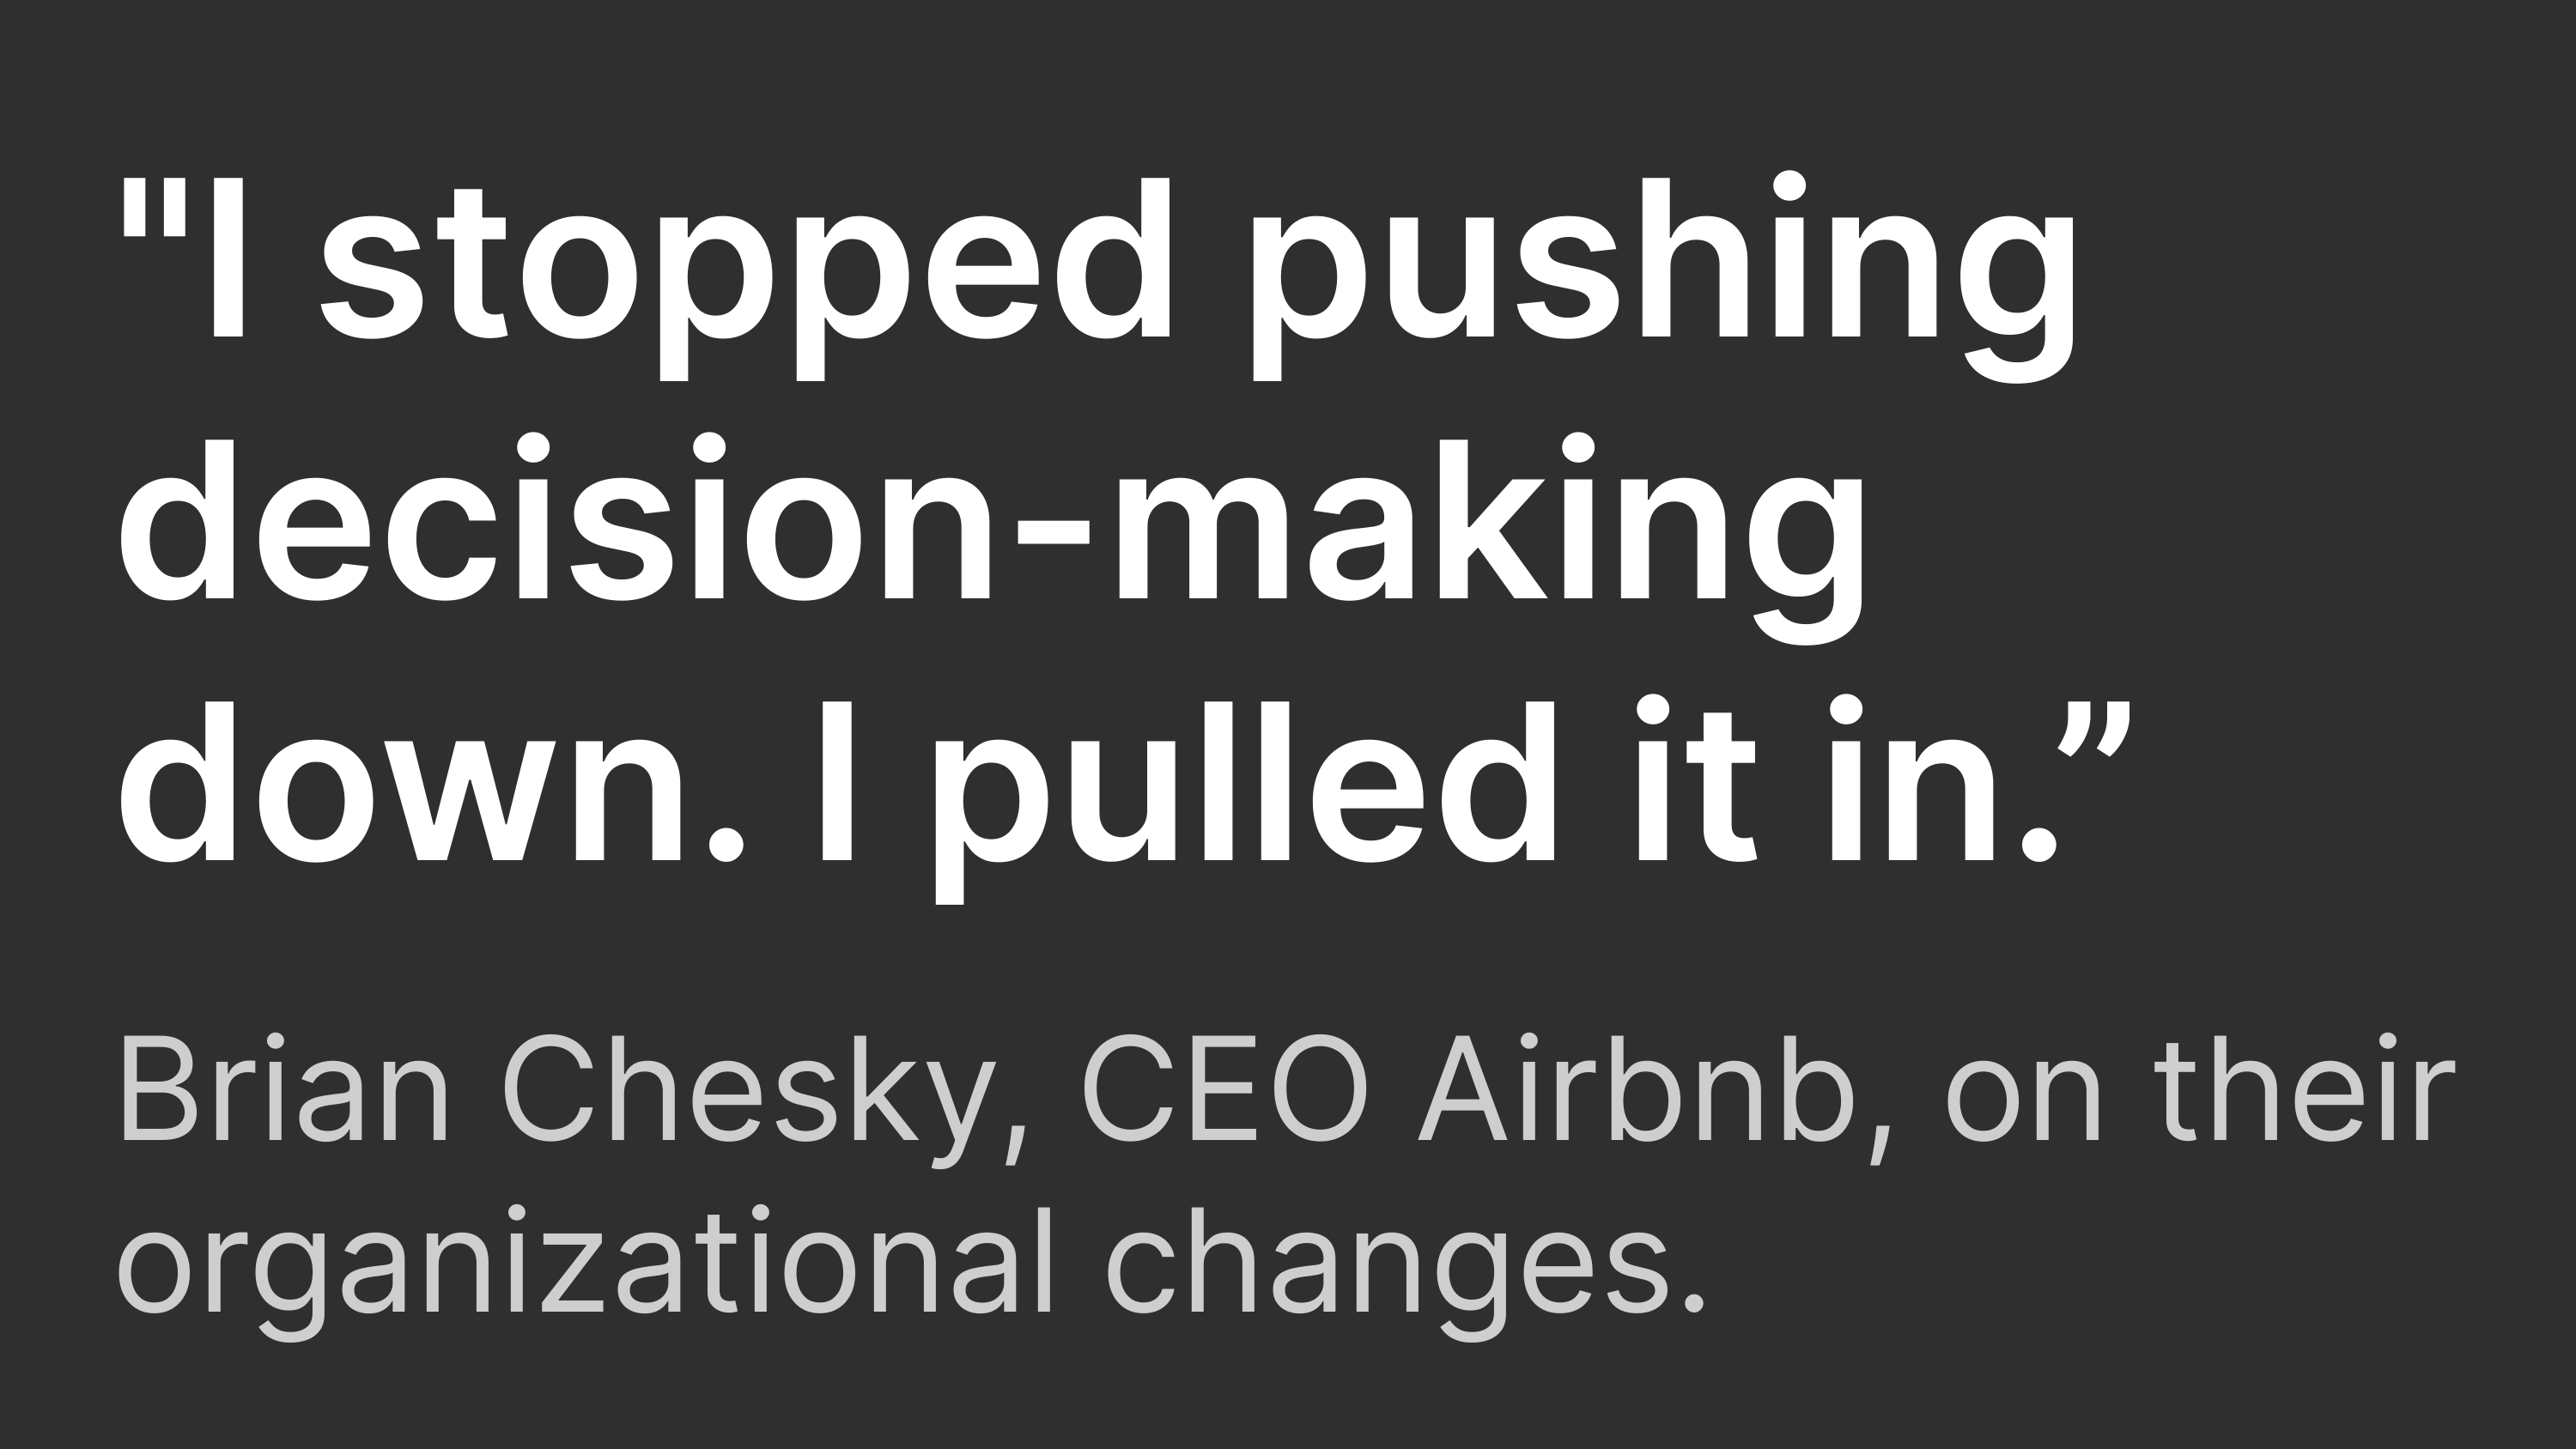 'I stopped pushing decision-making down. I pulled it in.' - Brian Chesky, CEO of Airbnb, on their organizational changes.